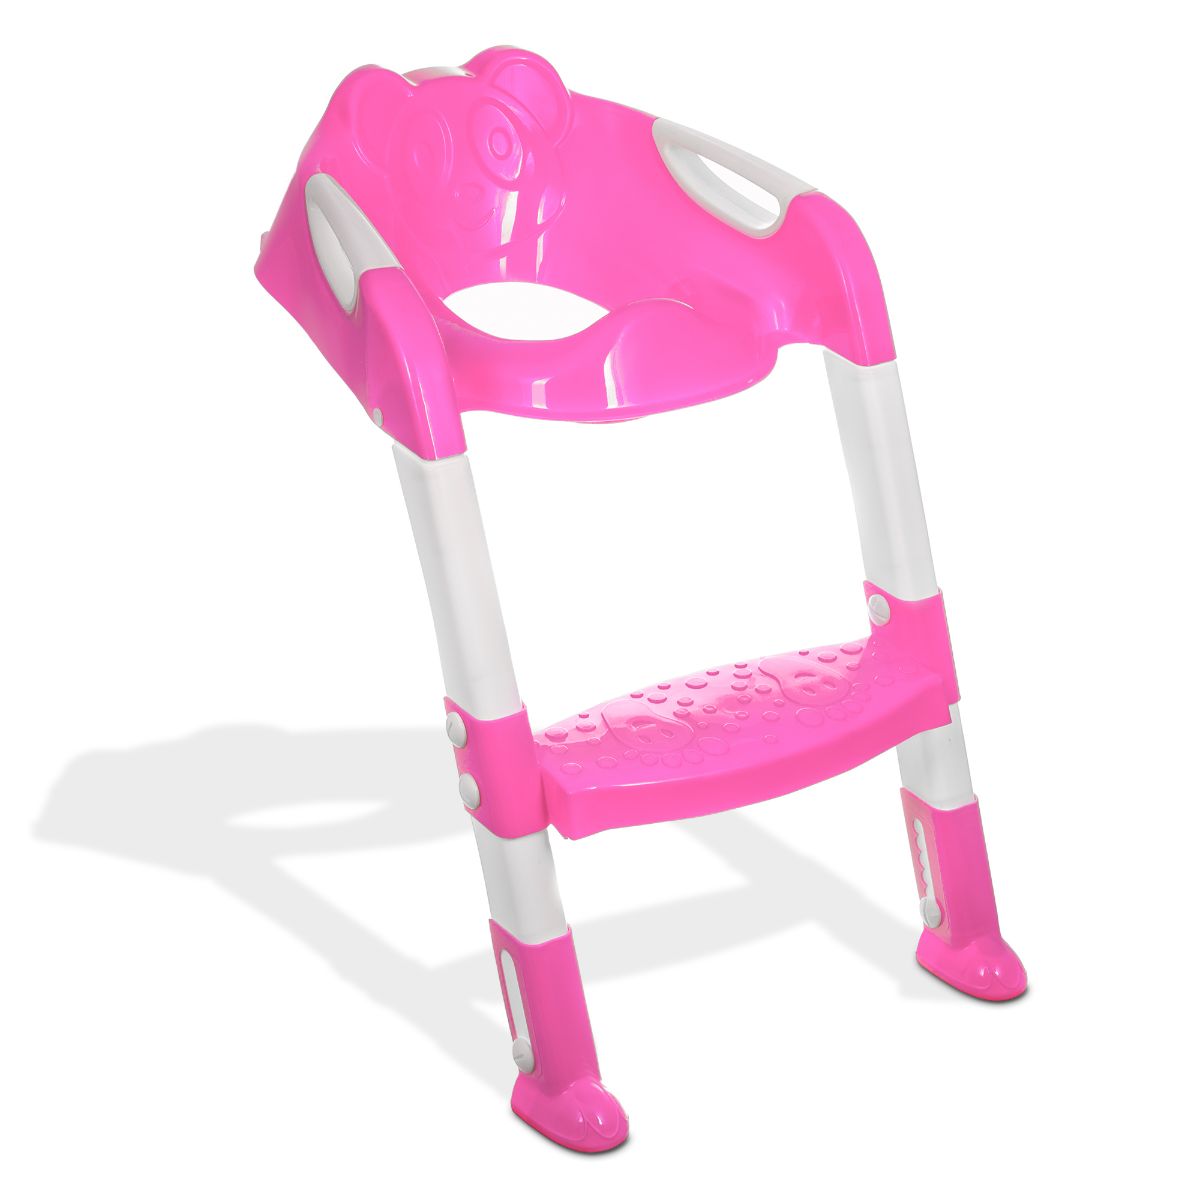 Baby Ladder For Toilet - 4 toilet baby